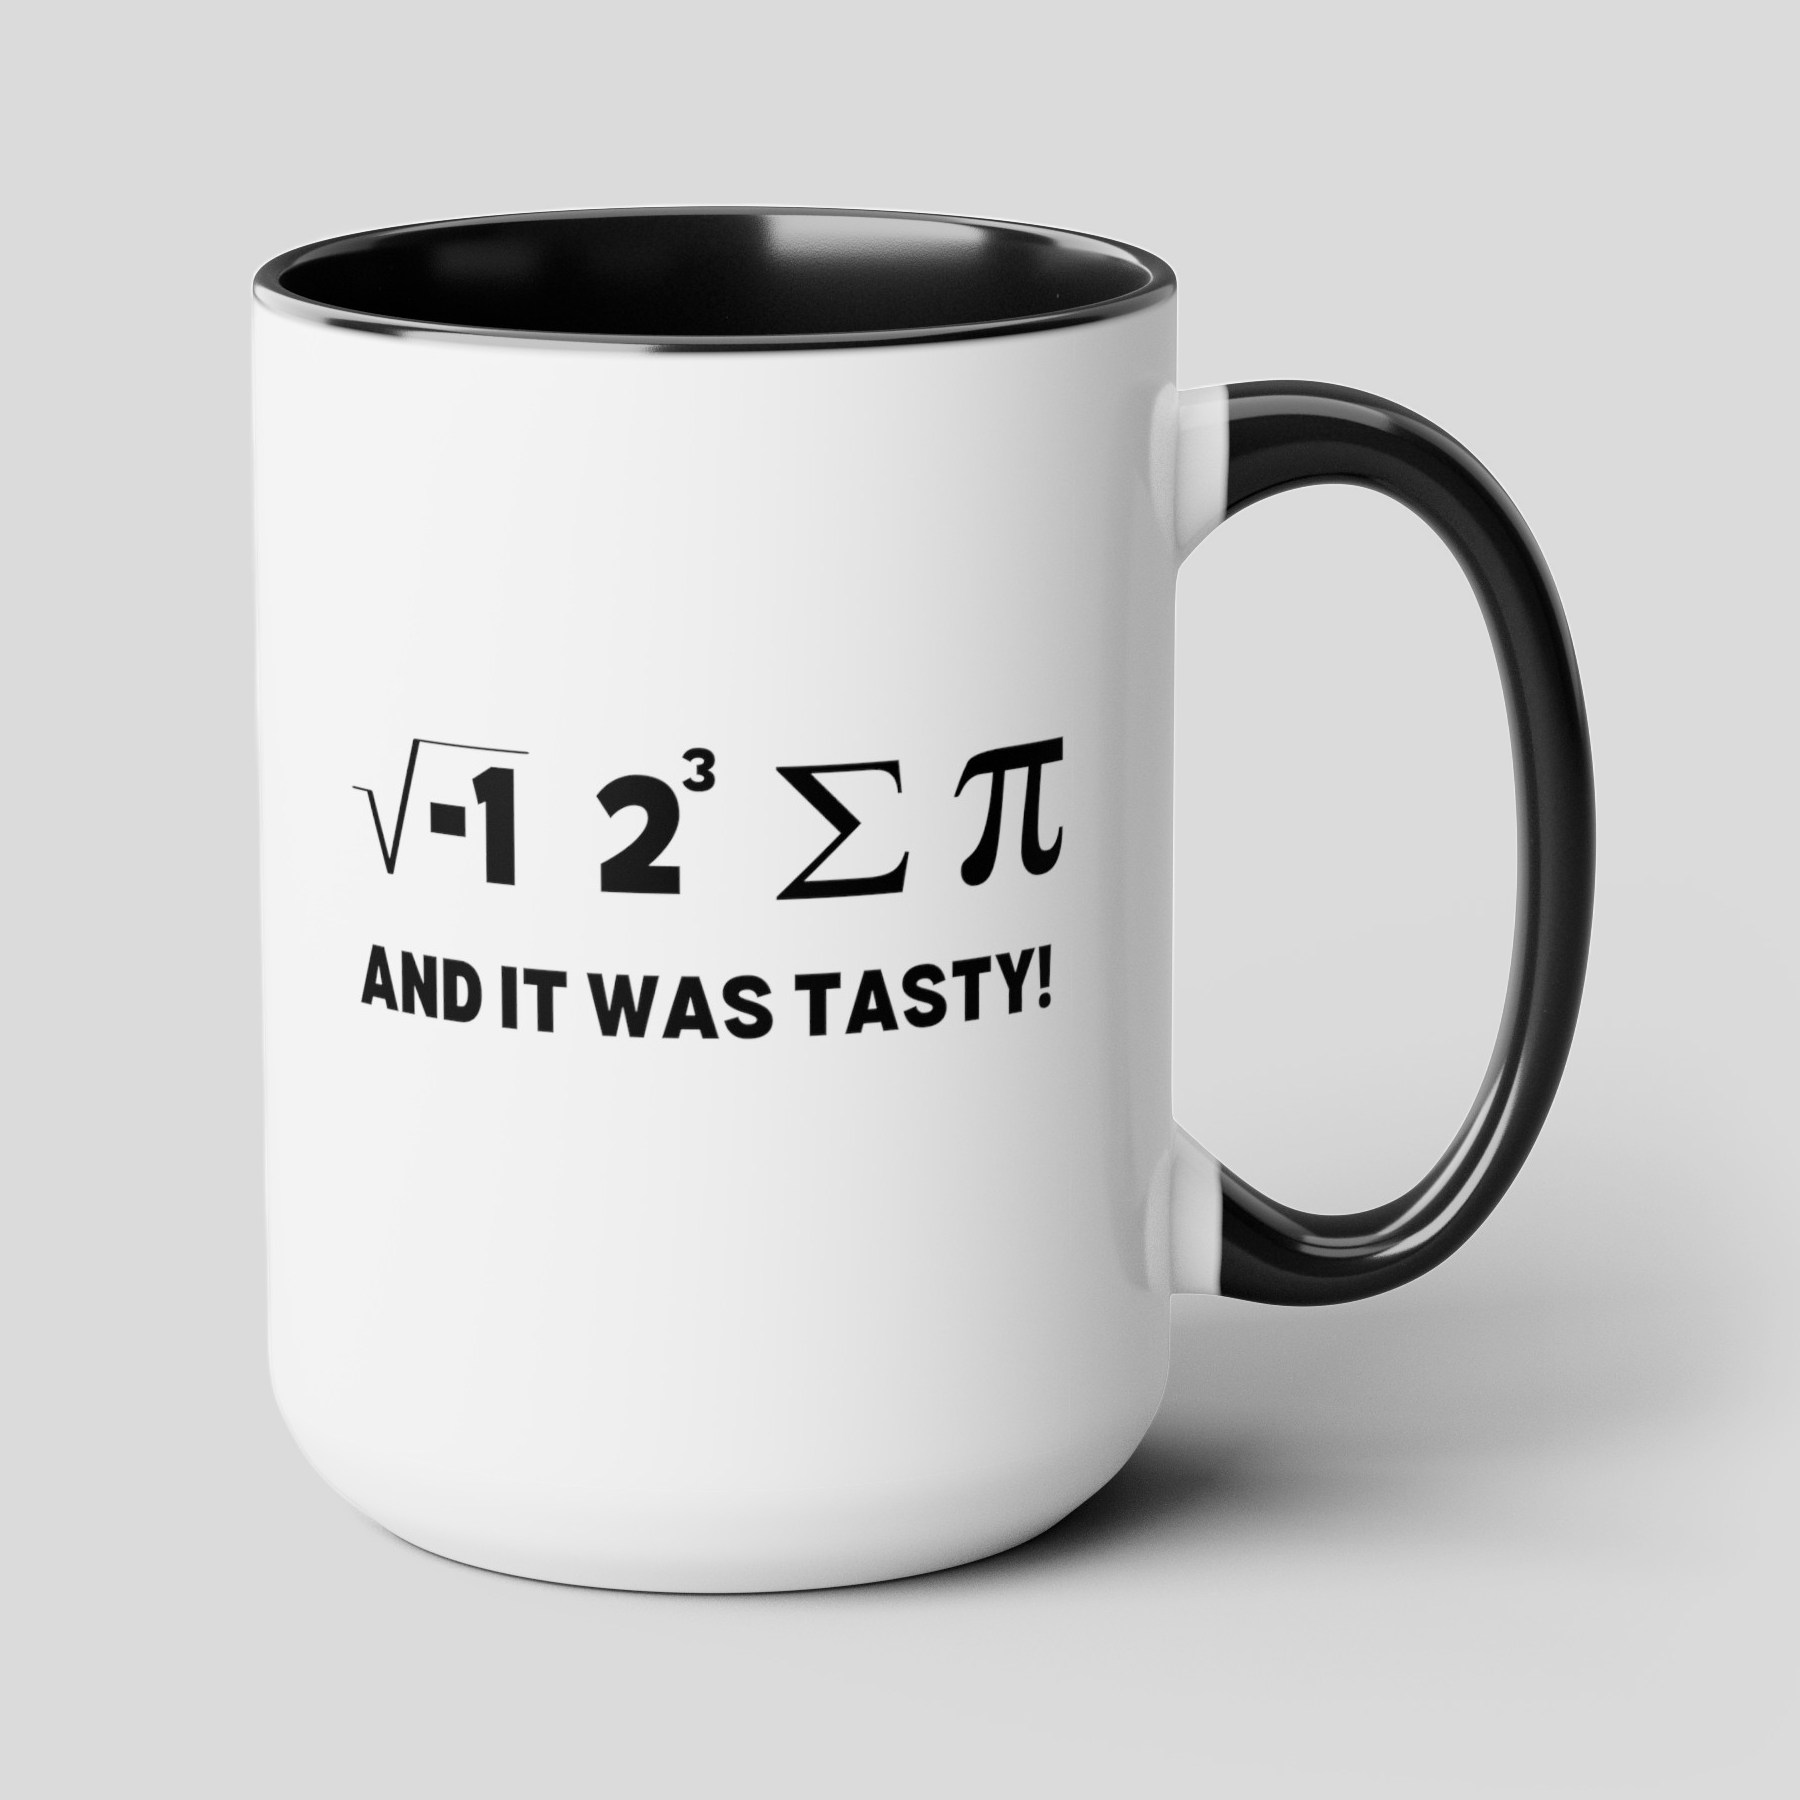 I Ate Some Pie And It Was Tasty 15oz white with black accent funny large coffee mug gift for math lover teacher geek nerdy science nerd novelty equations formula pun waveywares wavey wares wavywares wavy wares cover